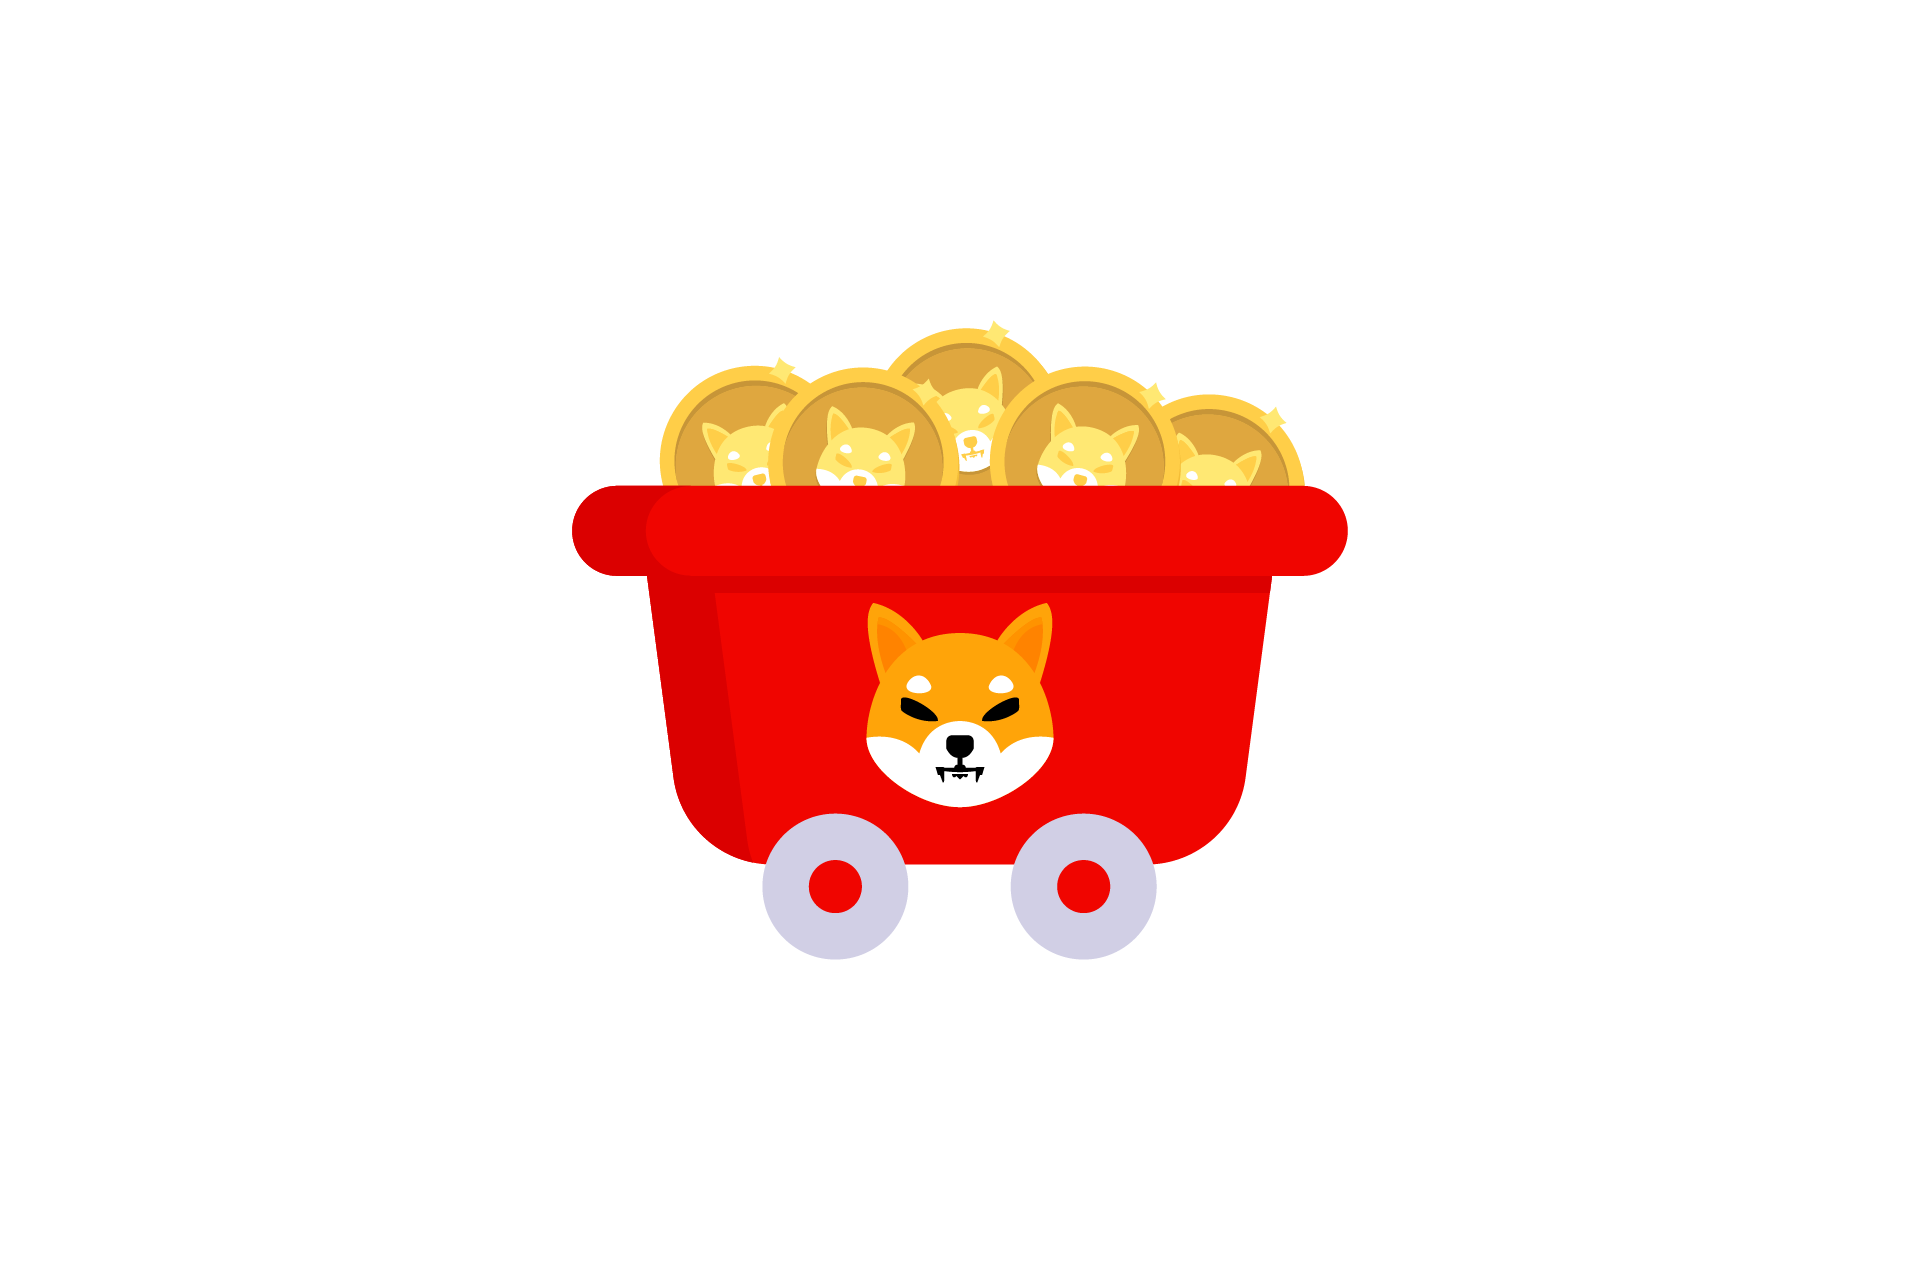 Cryptocurrency Shiba Inu Coin Vector-182 Graphic by ...